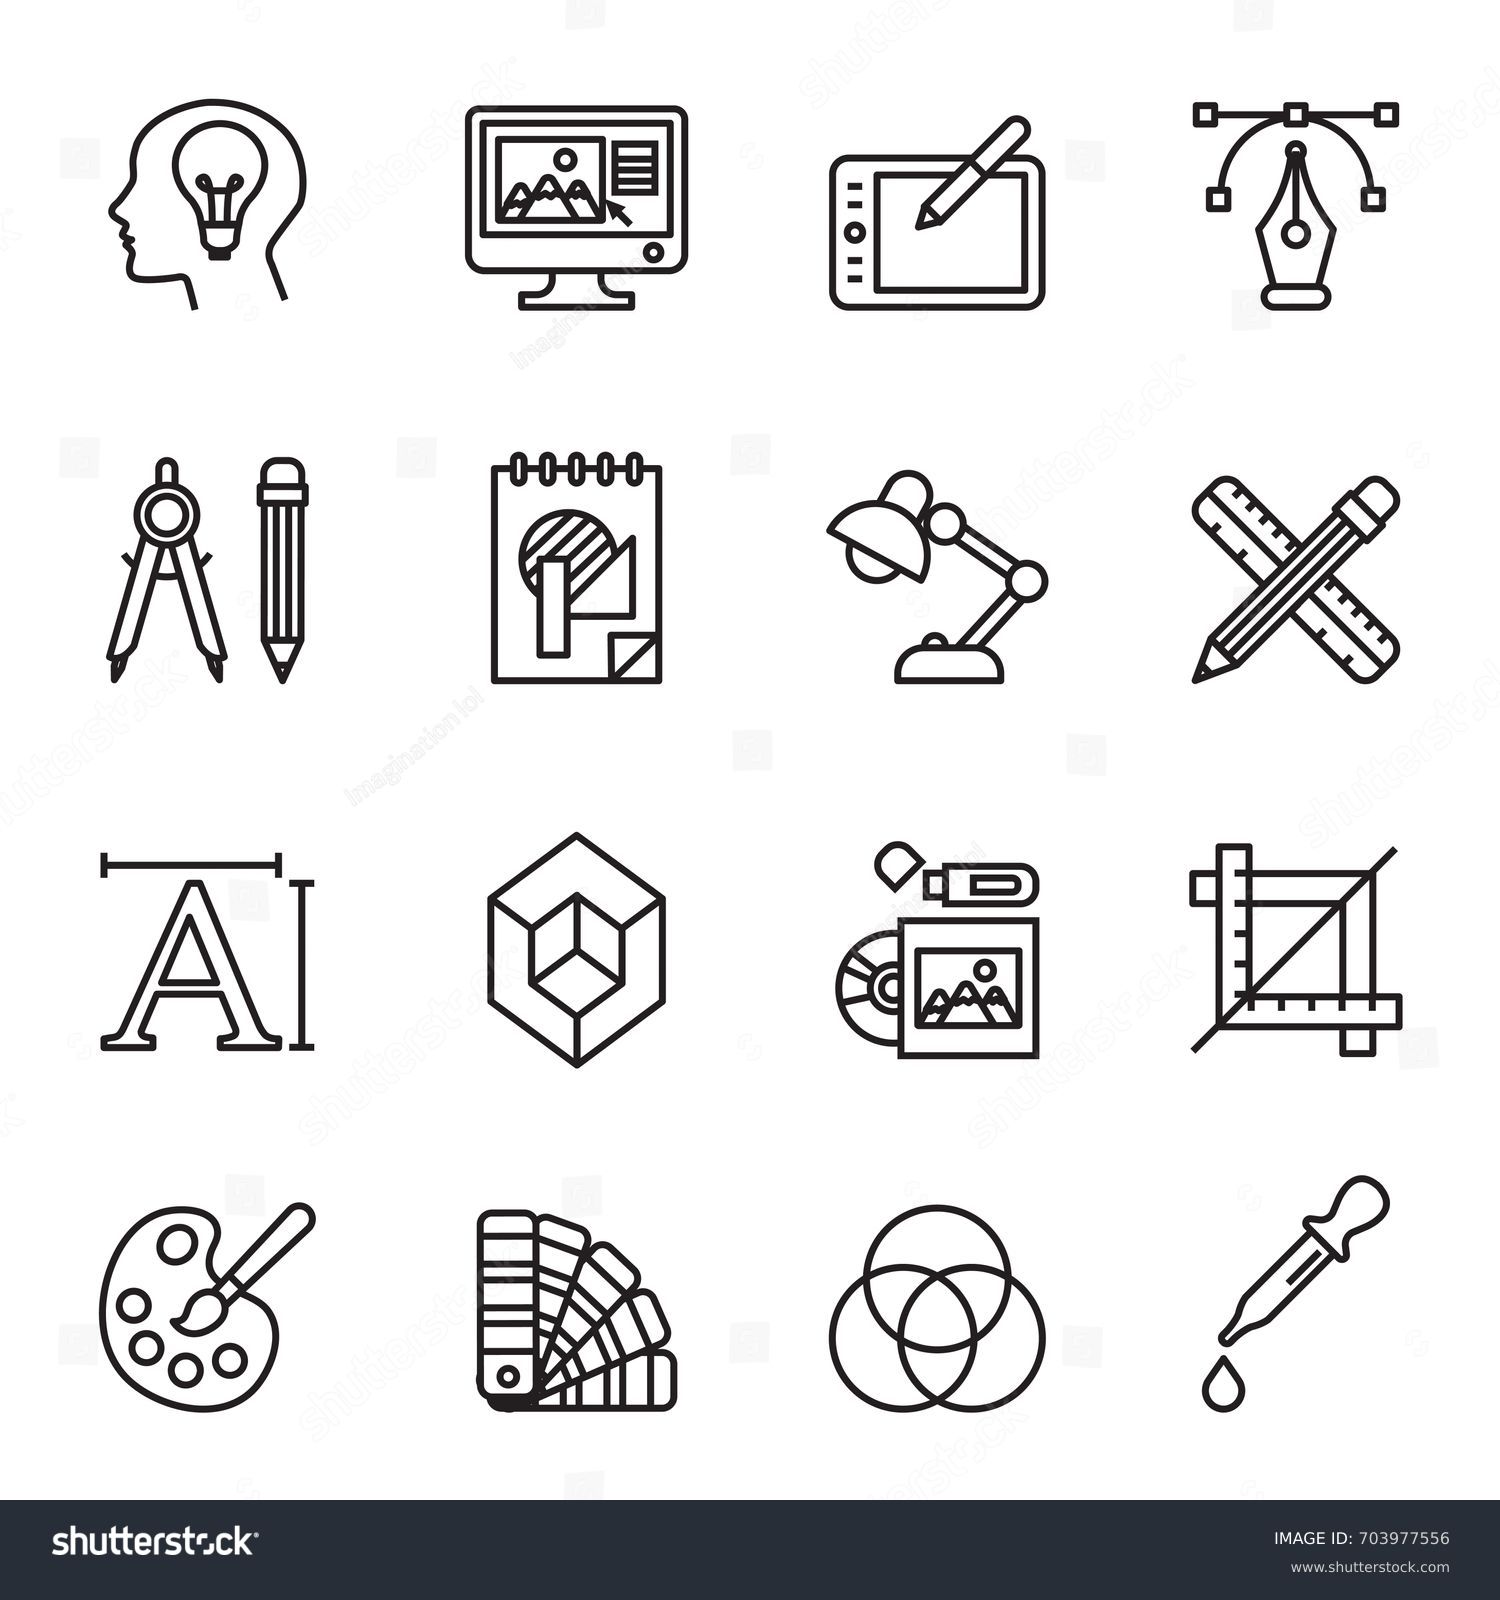 Art, drawing and web and graphic design icons set. Line Style stock vector. #703977556